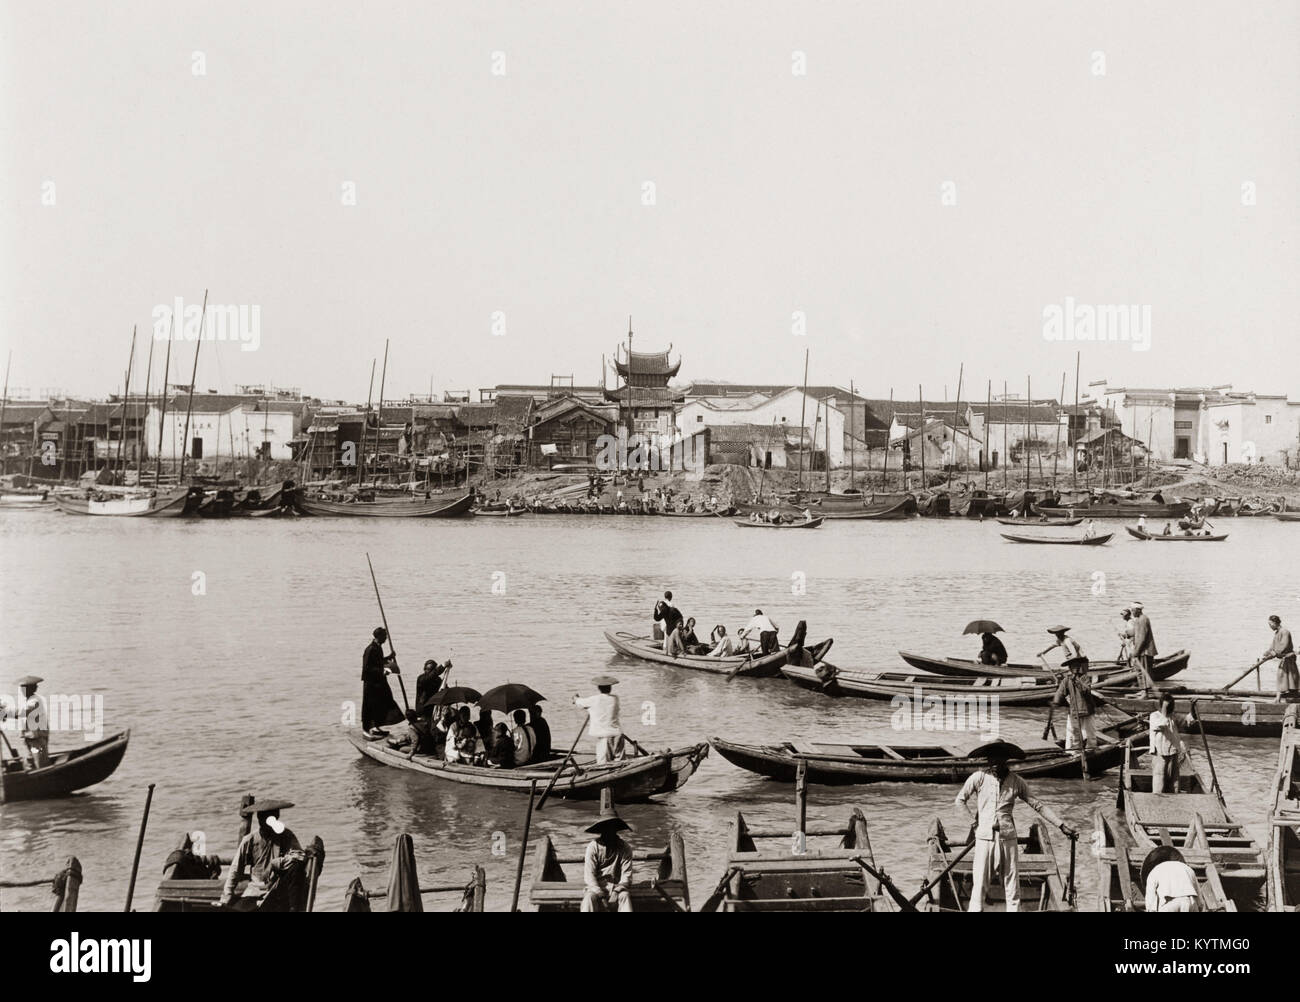 Waterfront scene with boats, China c.1900 - Location is in the Hankow/Hanyang/Wuchang area now know as Hankou. Stock Photo